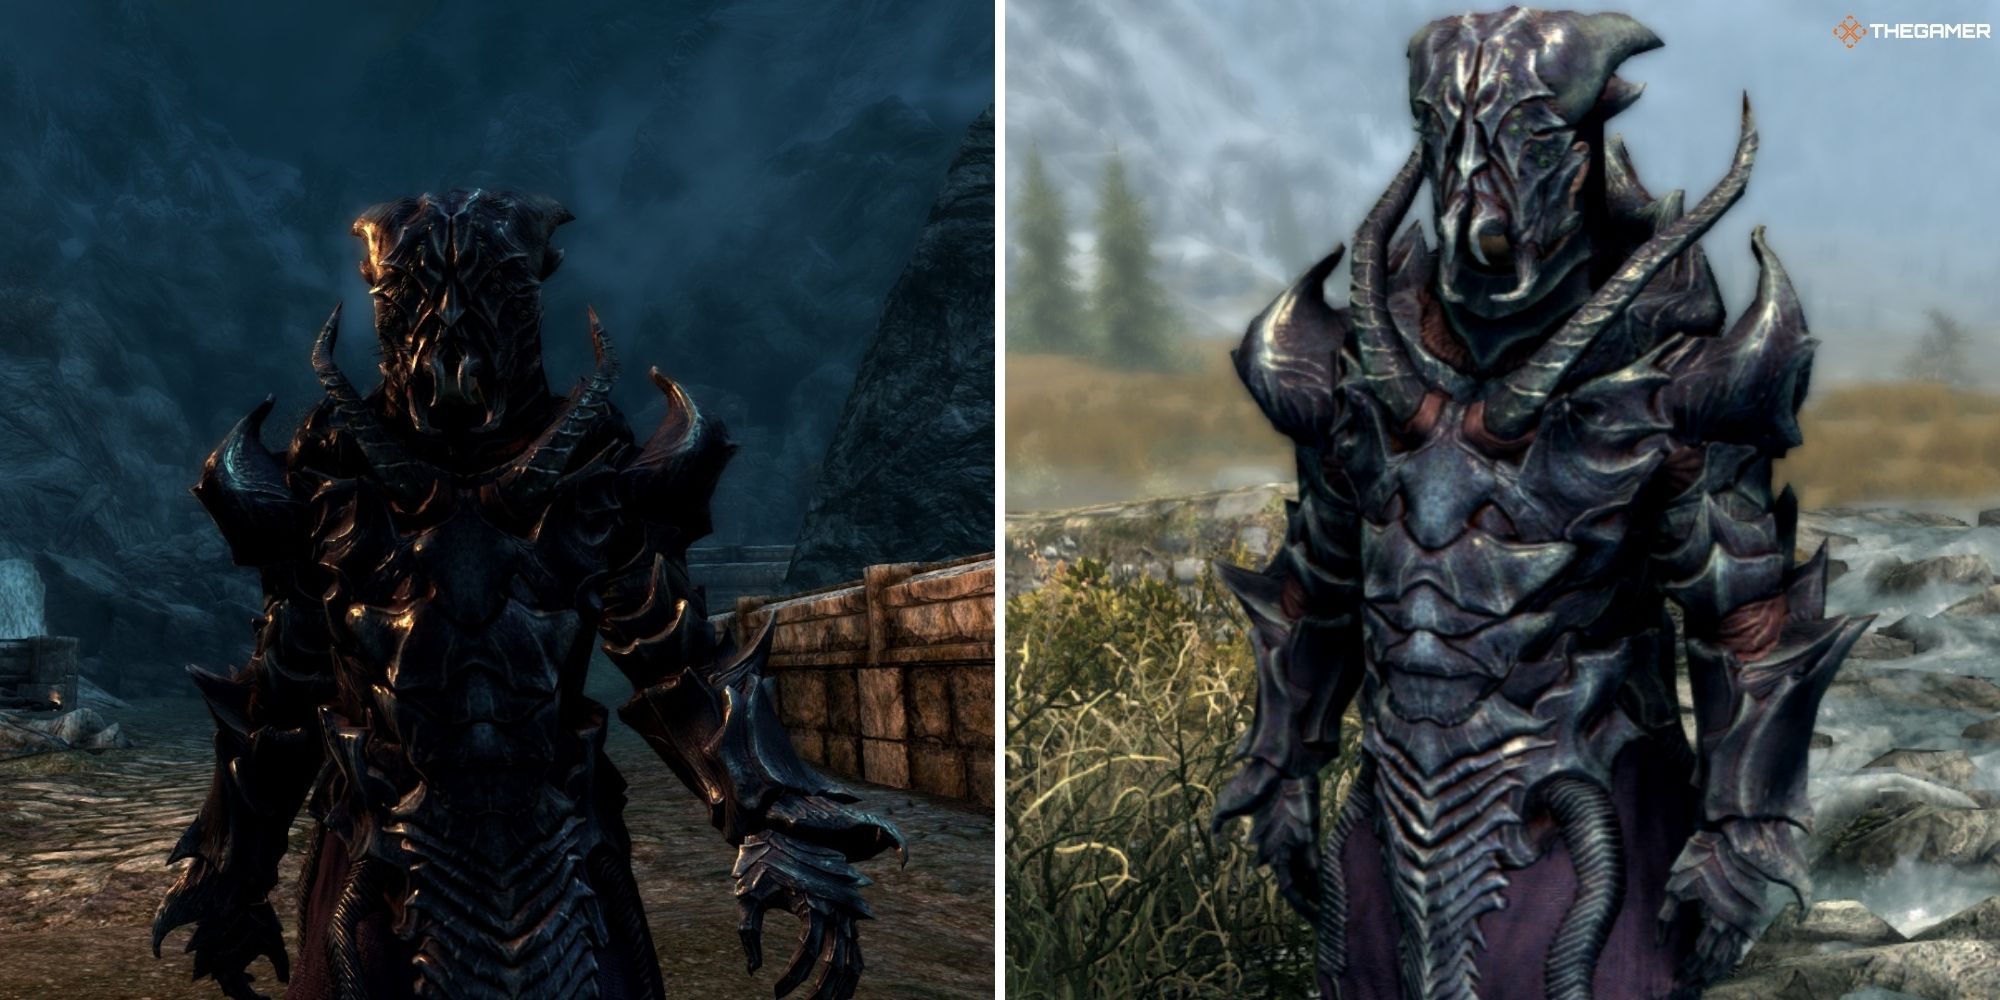 Skyrim: Best Armor Sets & How To Find Them